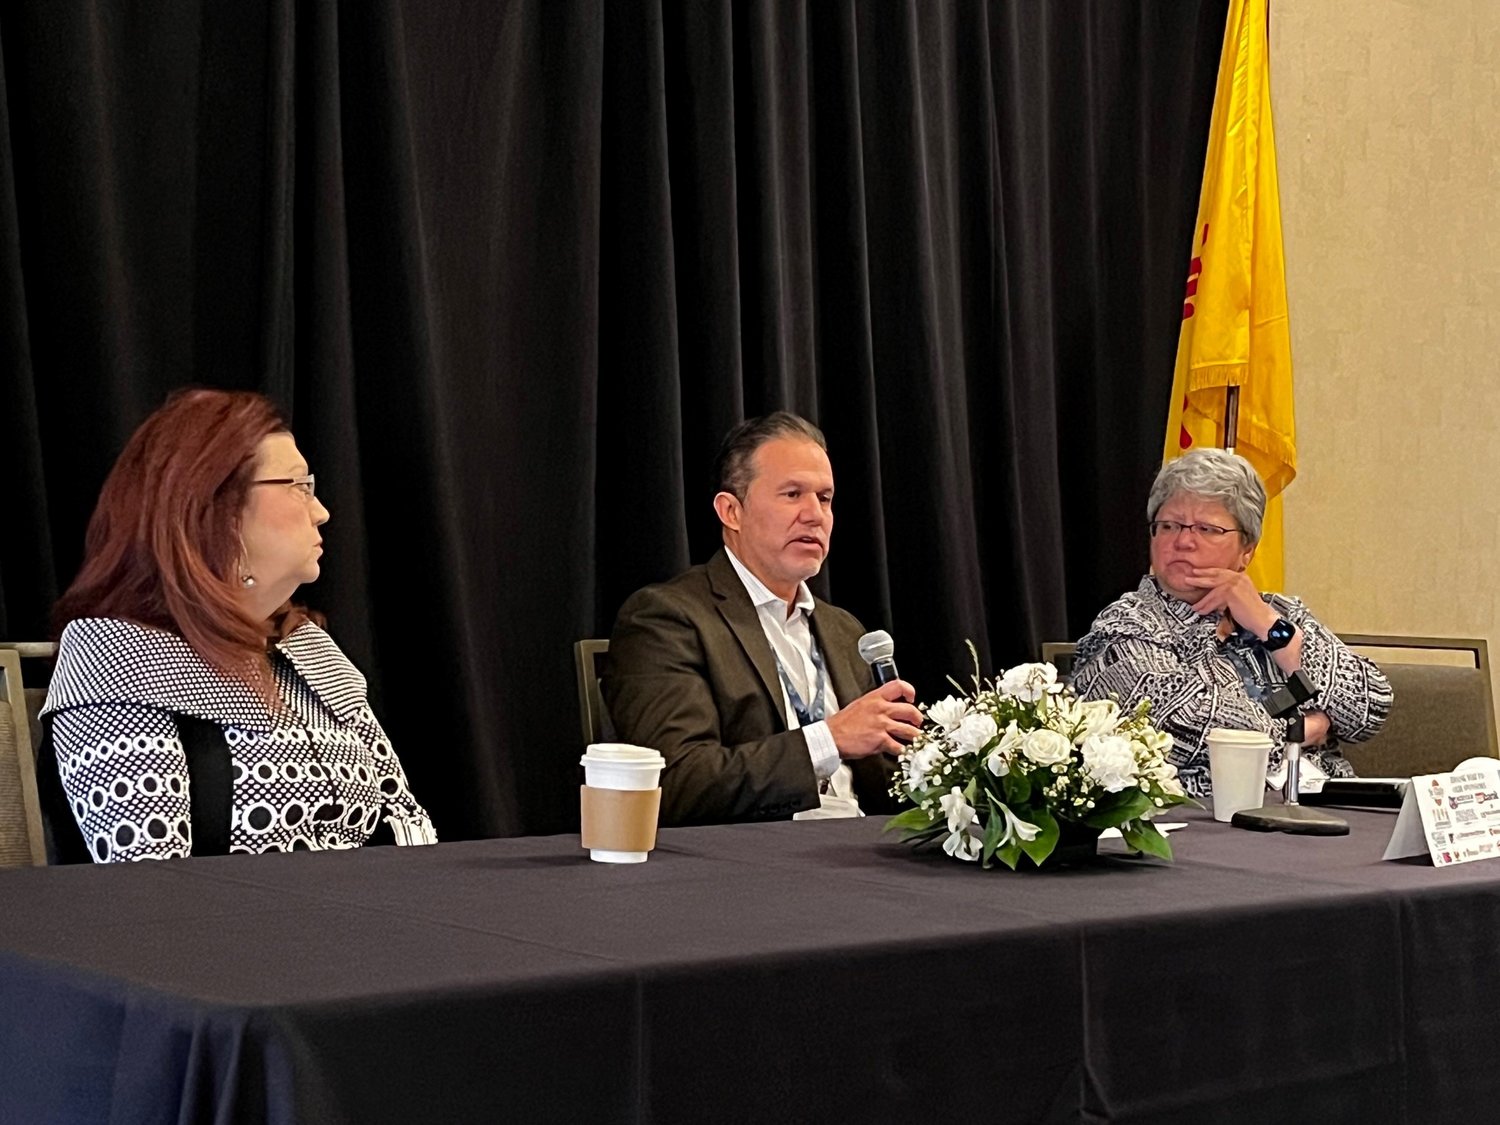 Greater Las Cruces Chamber of Commerce President & CEO Debbi Moore, Mesilla Valley Economic Development Alliance President & CEO Davin Lopez, and Doña Ana County Community College President Monica Torres led a panel discussion on workforce issues in Southern New Mexico.